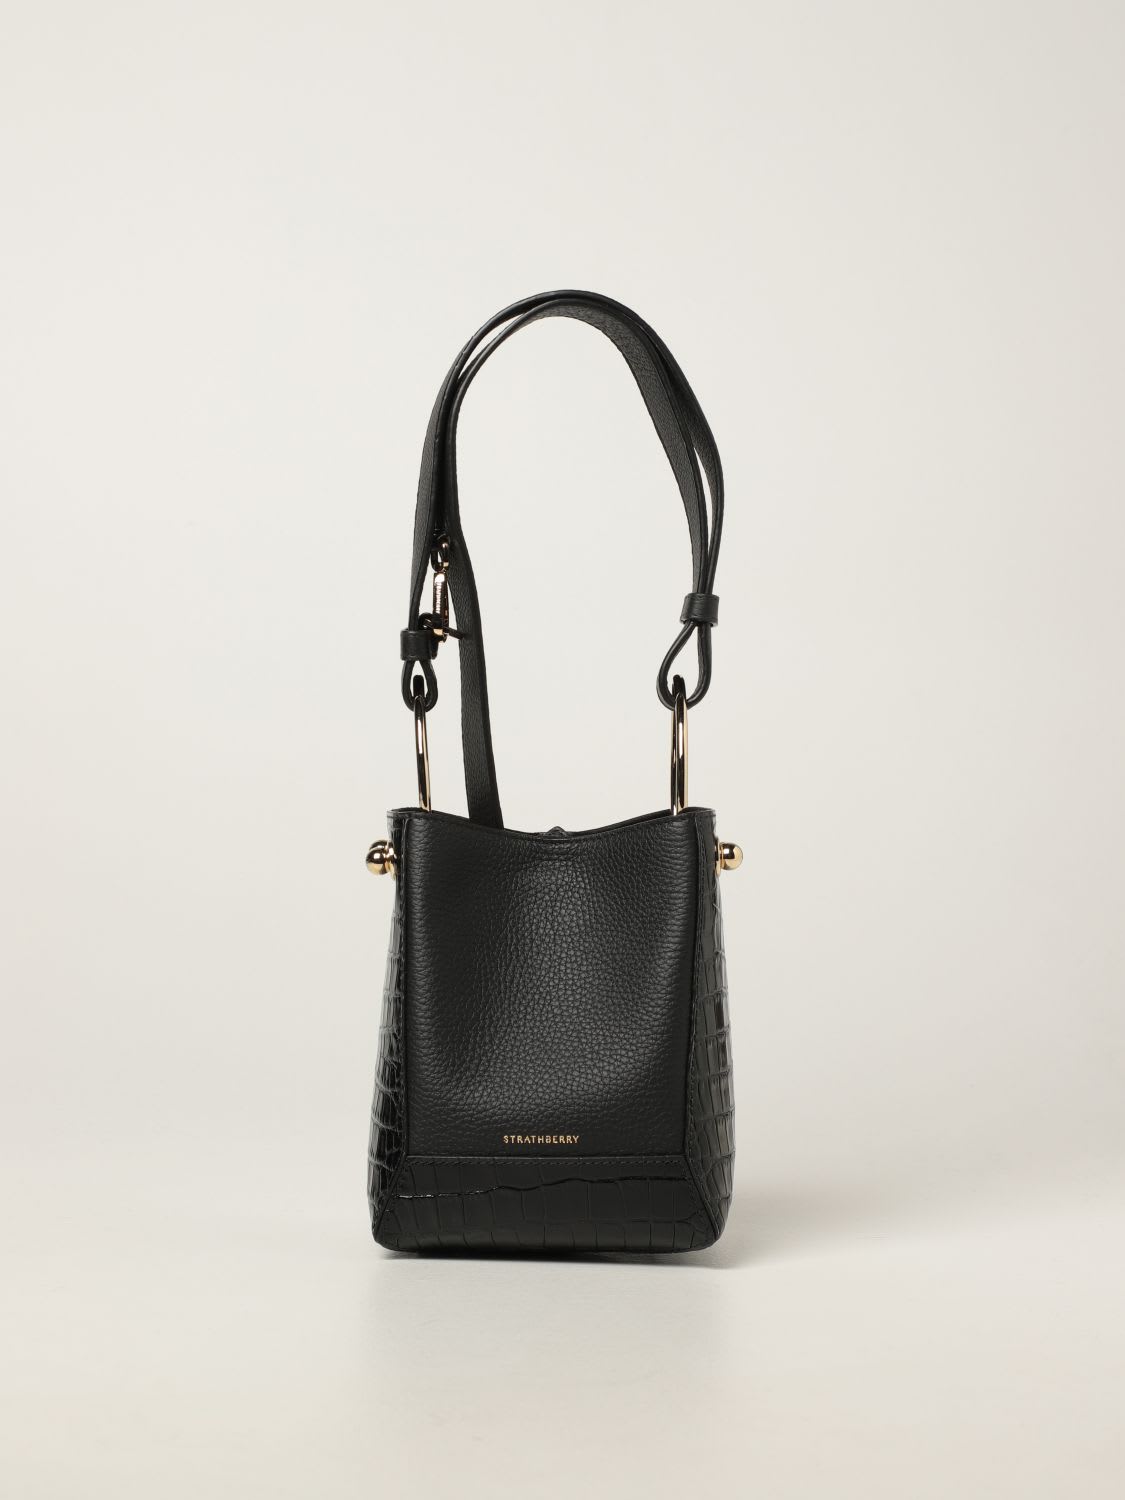 Strathberry Mini Bag Strathberry Nano Wool Bag In Textured Leather And With Crocodile Print